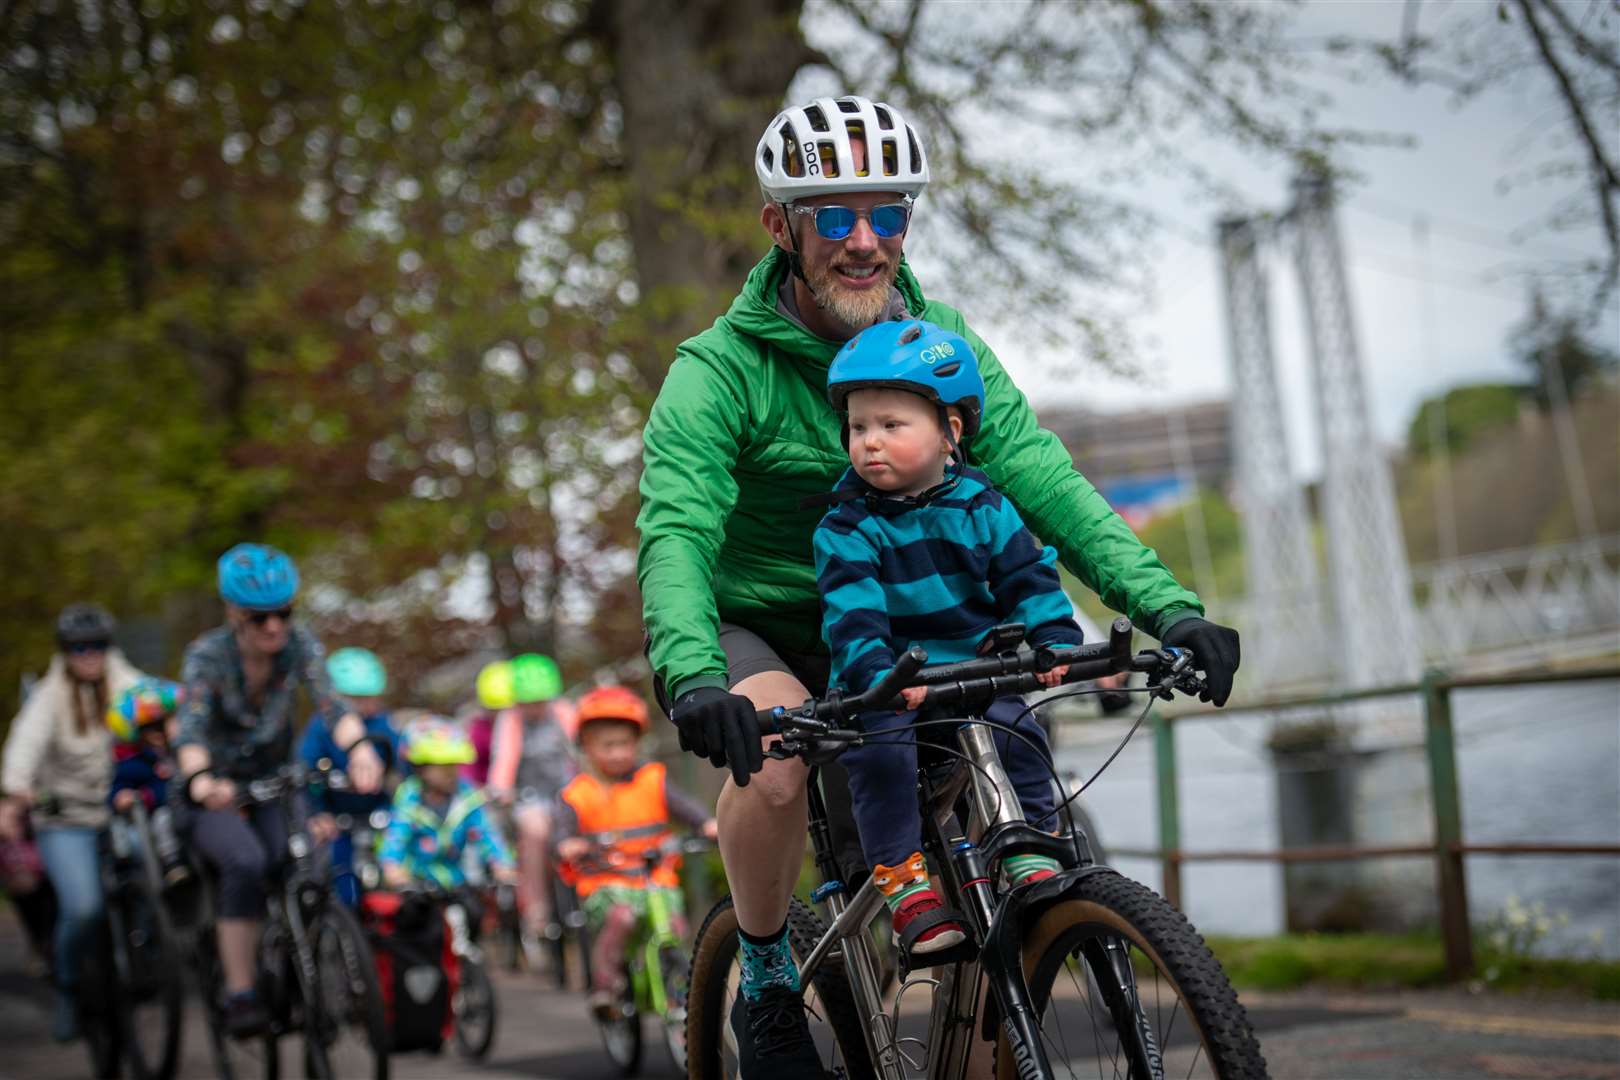 Children and their grown ups enjoyed the May Kidical Mass event in Inverness. Picture: Callum Mackay